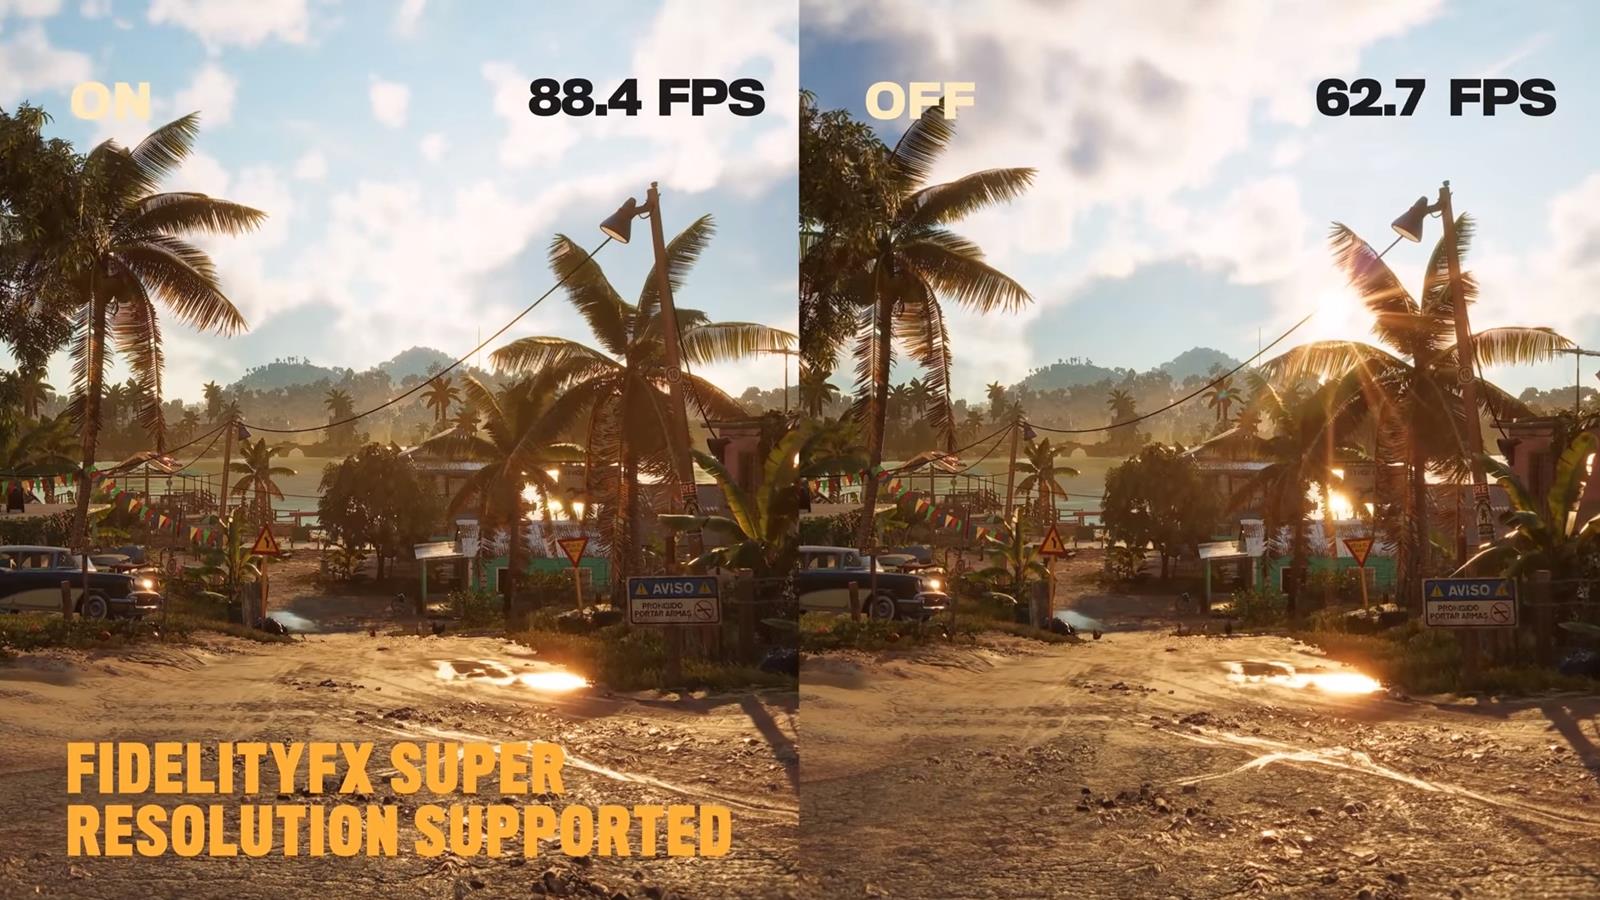 How does FSR improve Far Cry 6?  We know the liquidity increases thanks to the AMD feature